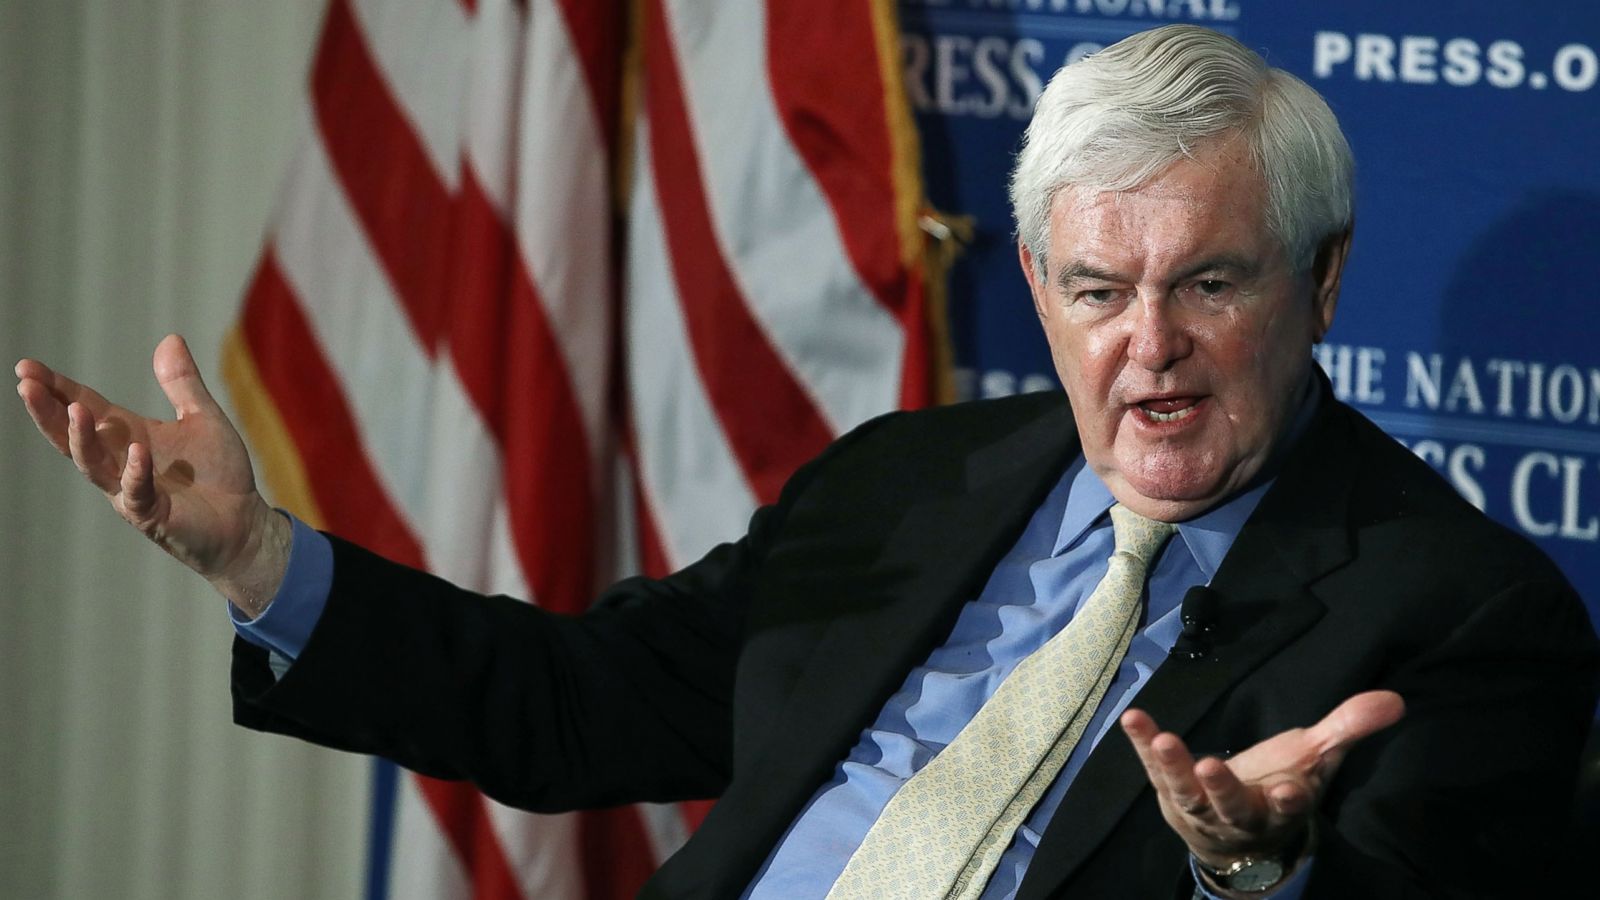 [WATCH/COMMENTARY] Newt Gingrich Says President Biden is Beating the GOP